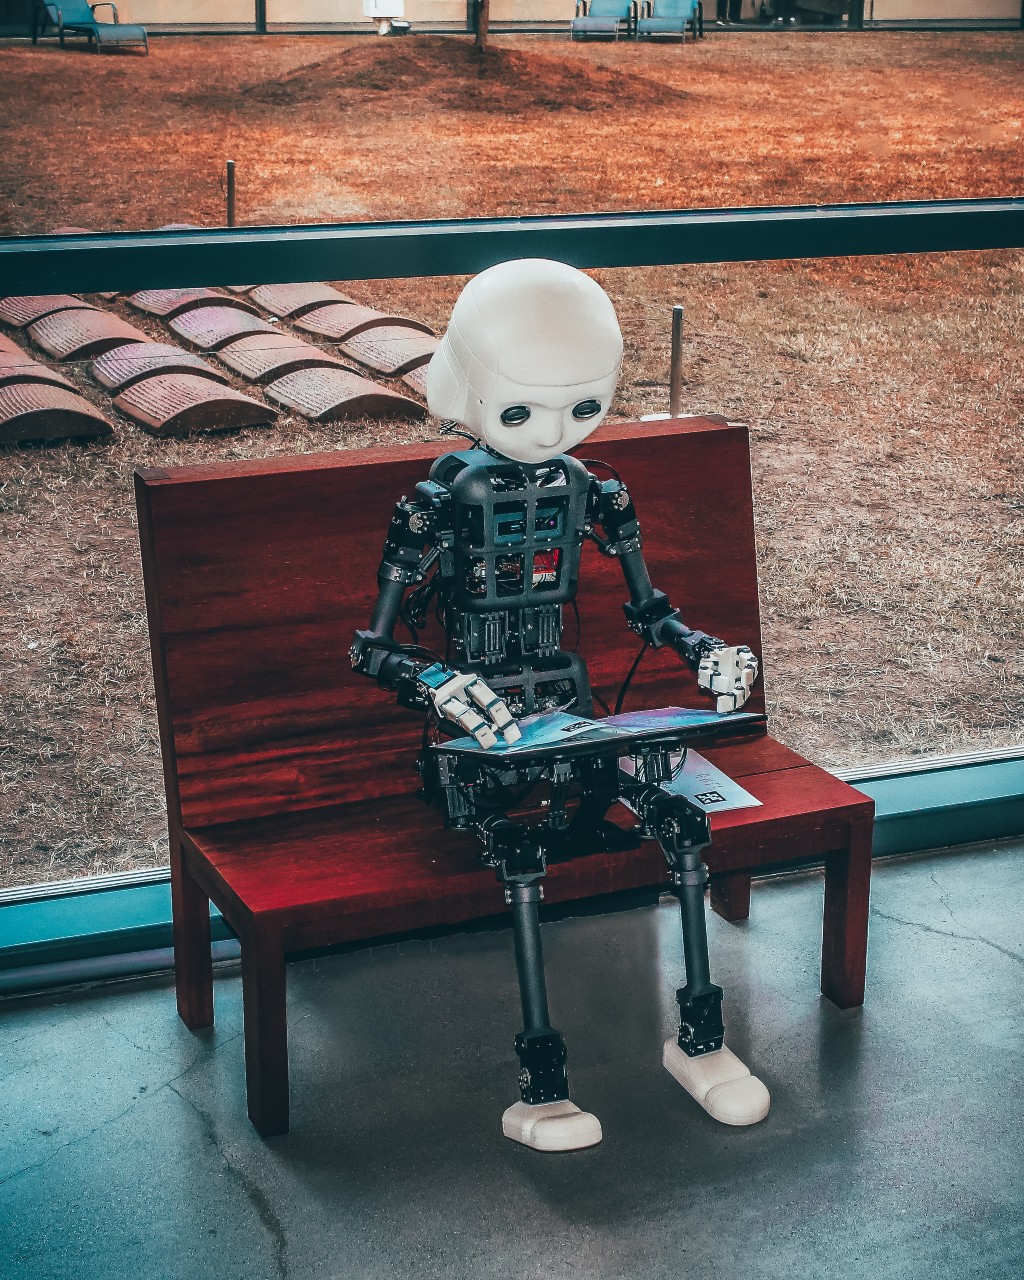 Robot sitting on a bench outdoors